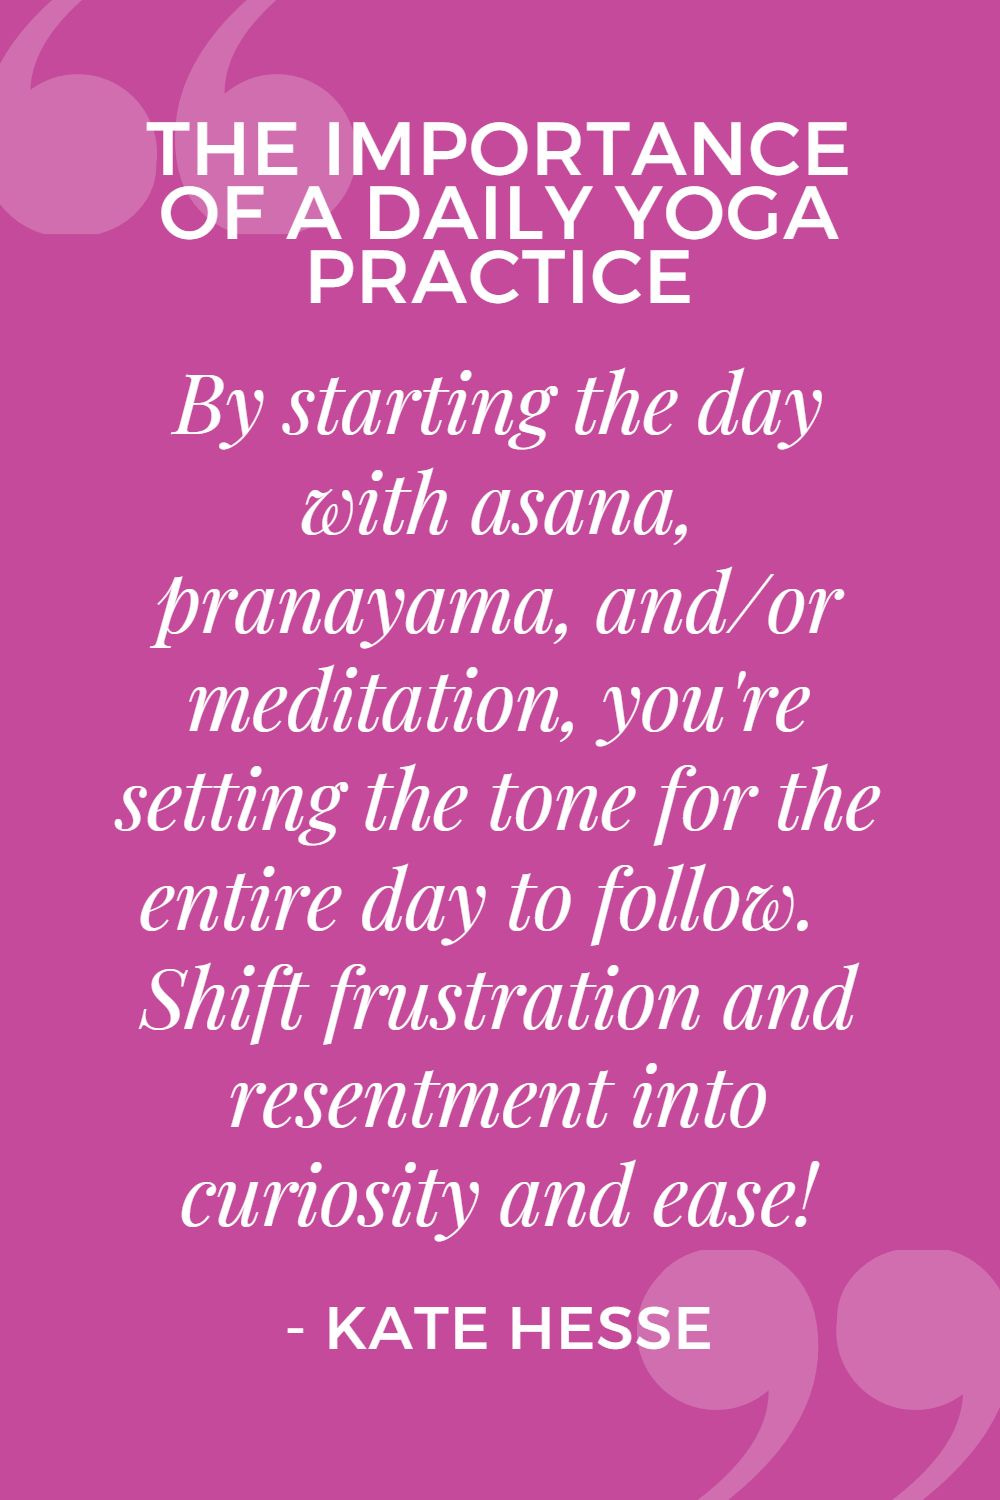 By starting the day with asana, pranayama, and/or meditation, you're setting the tone for the entire day to follow. Shift frustration and resentment into curiosity and ease!